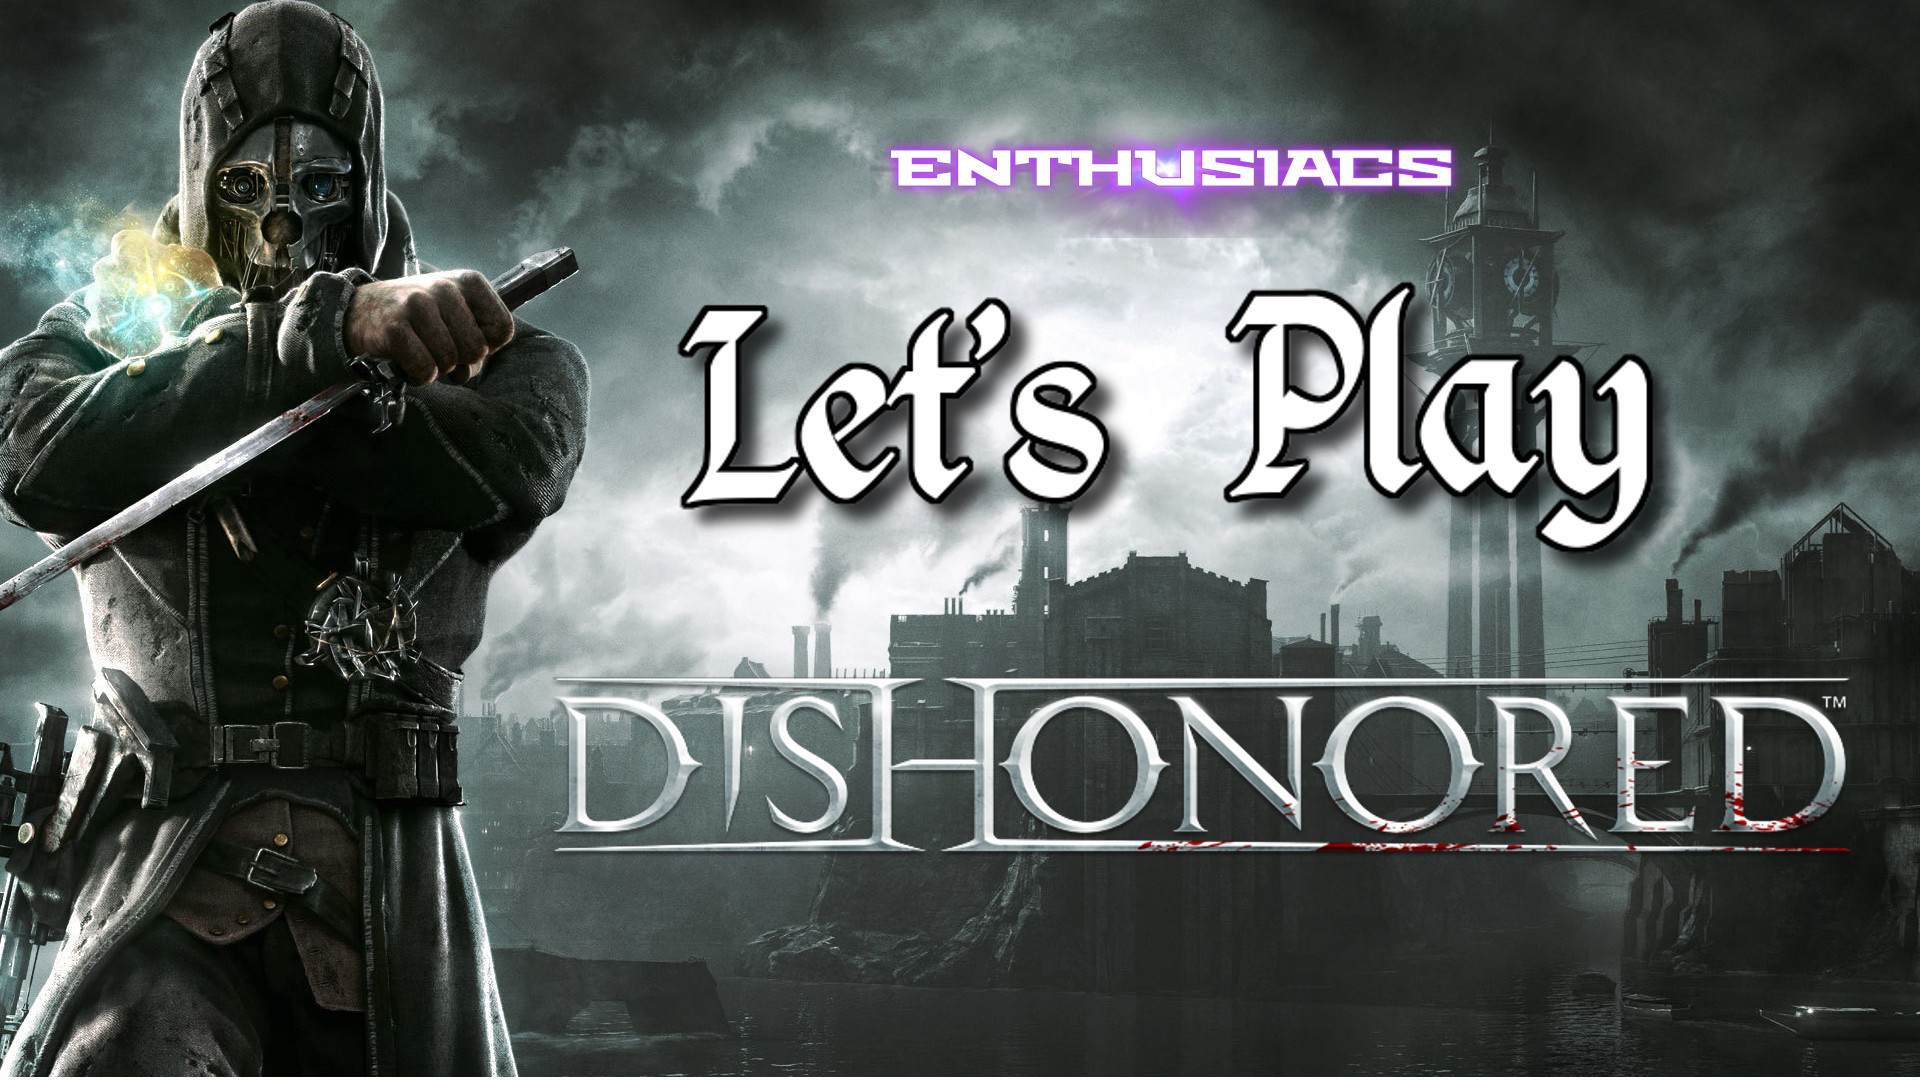 Dishonored. He. Is Coming. For YOU!